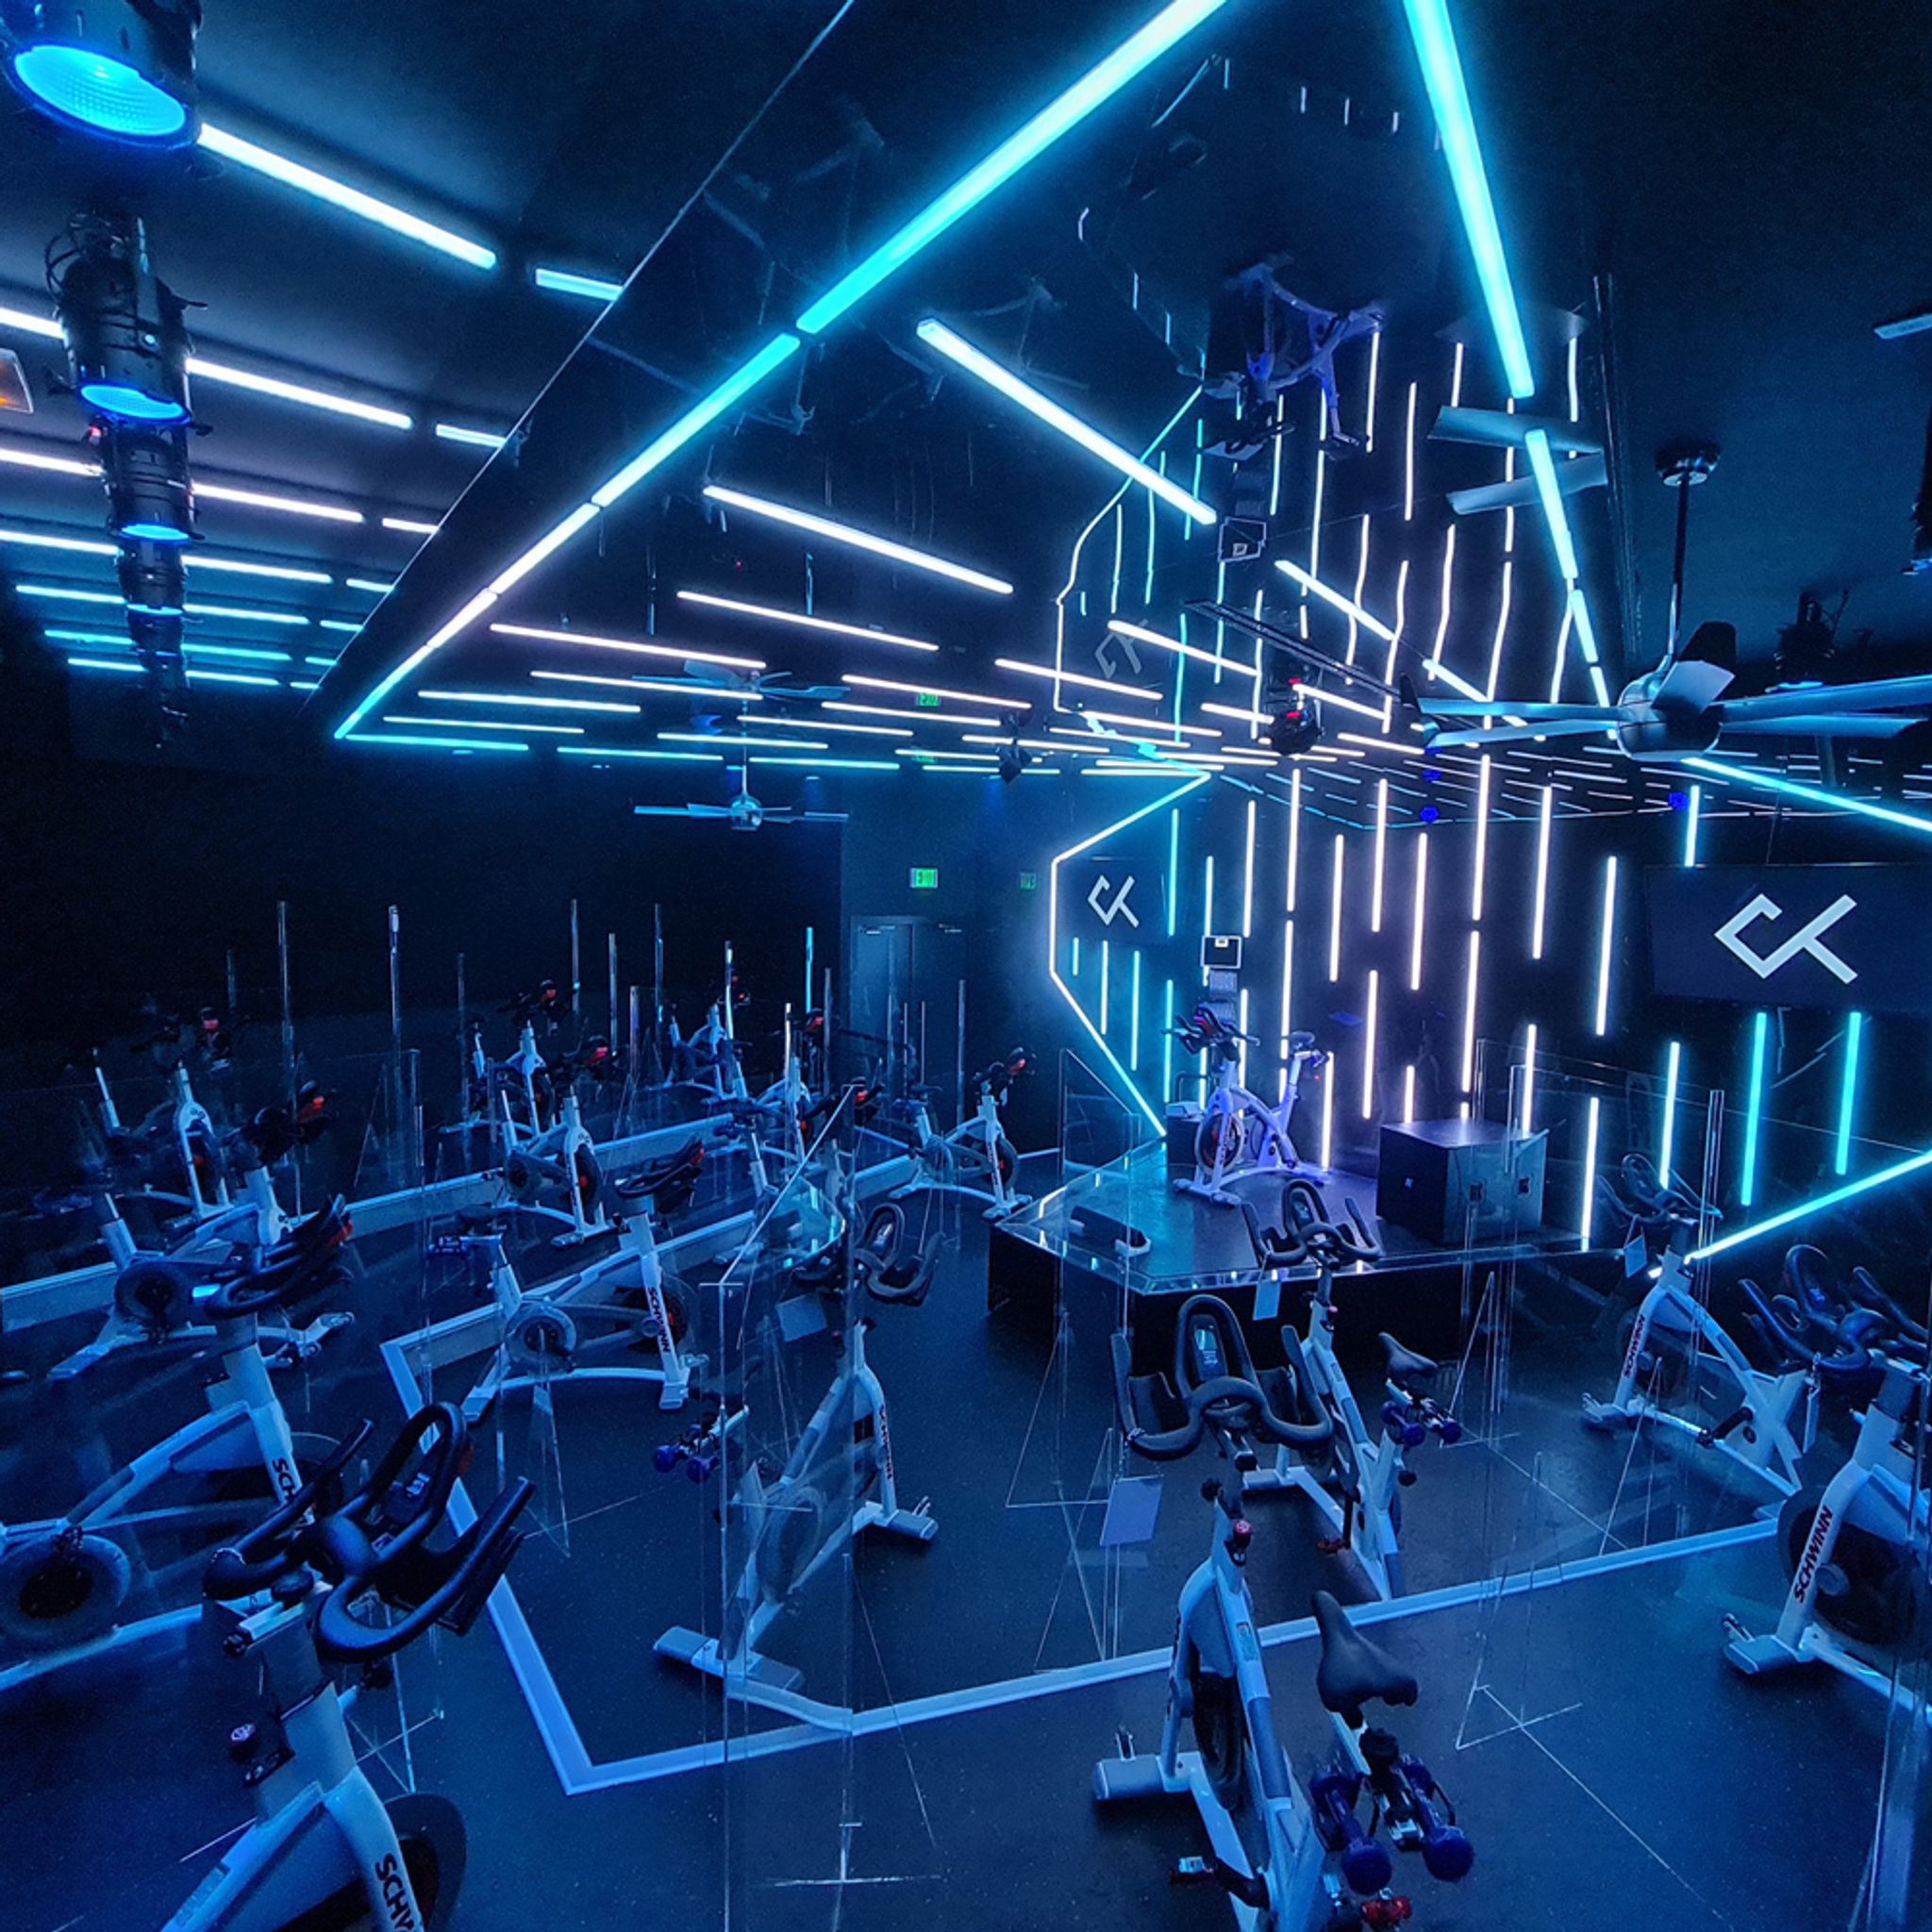 CRANK is a boutique fitness gym in Dubai offering indoor cycling